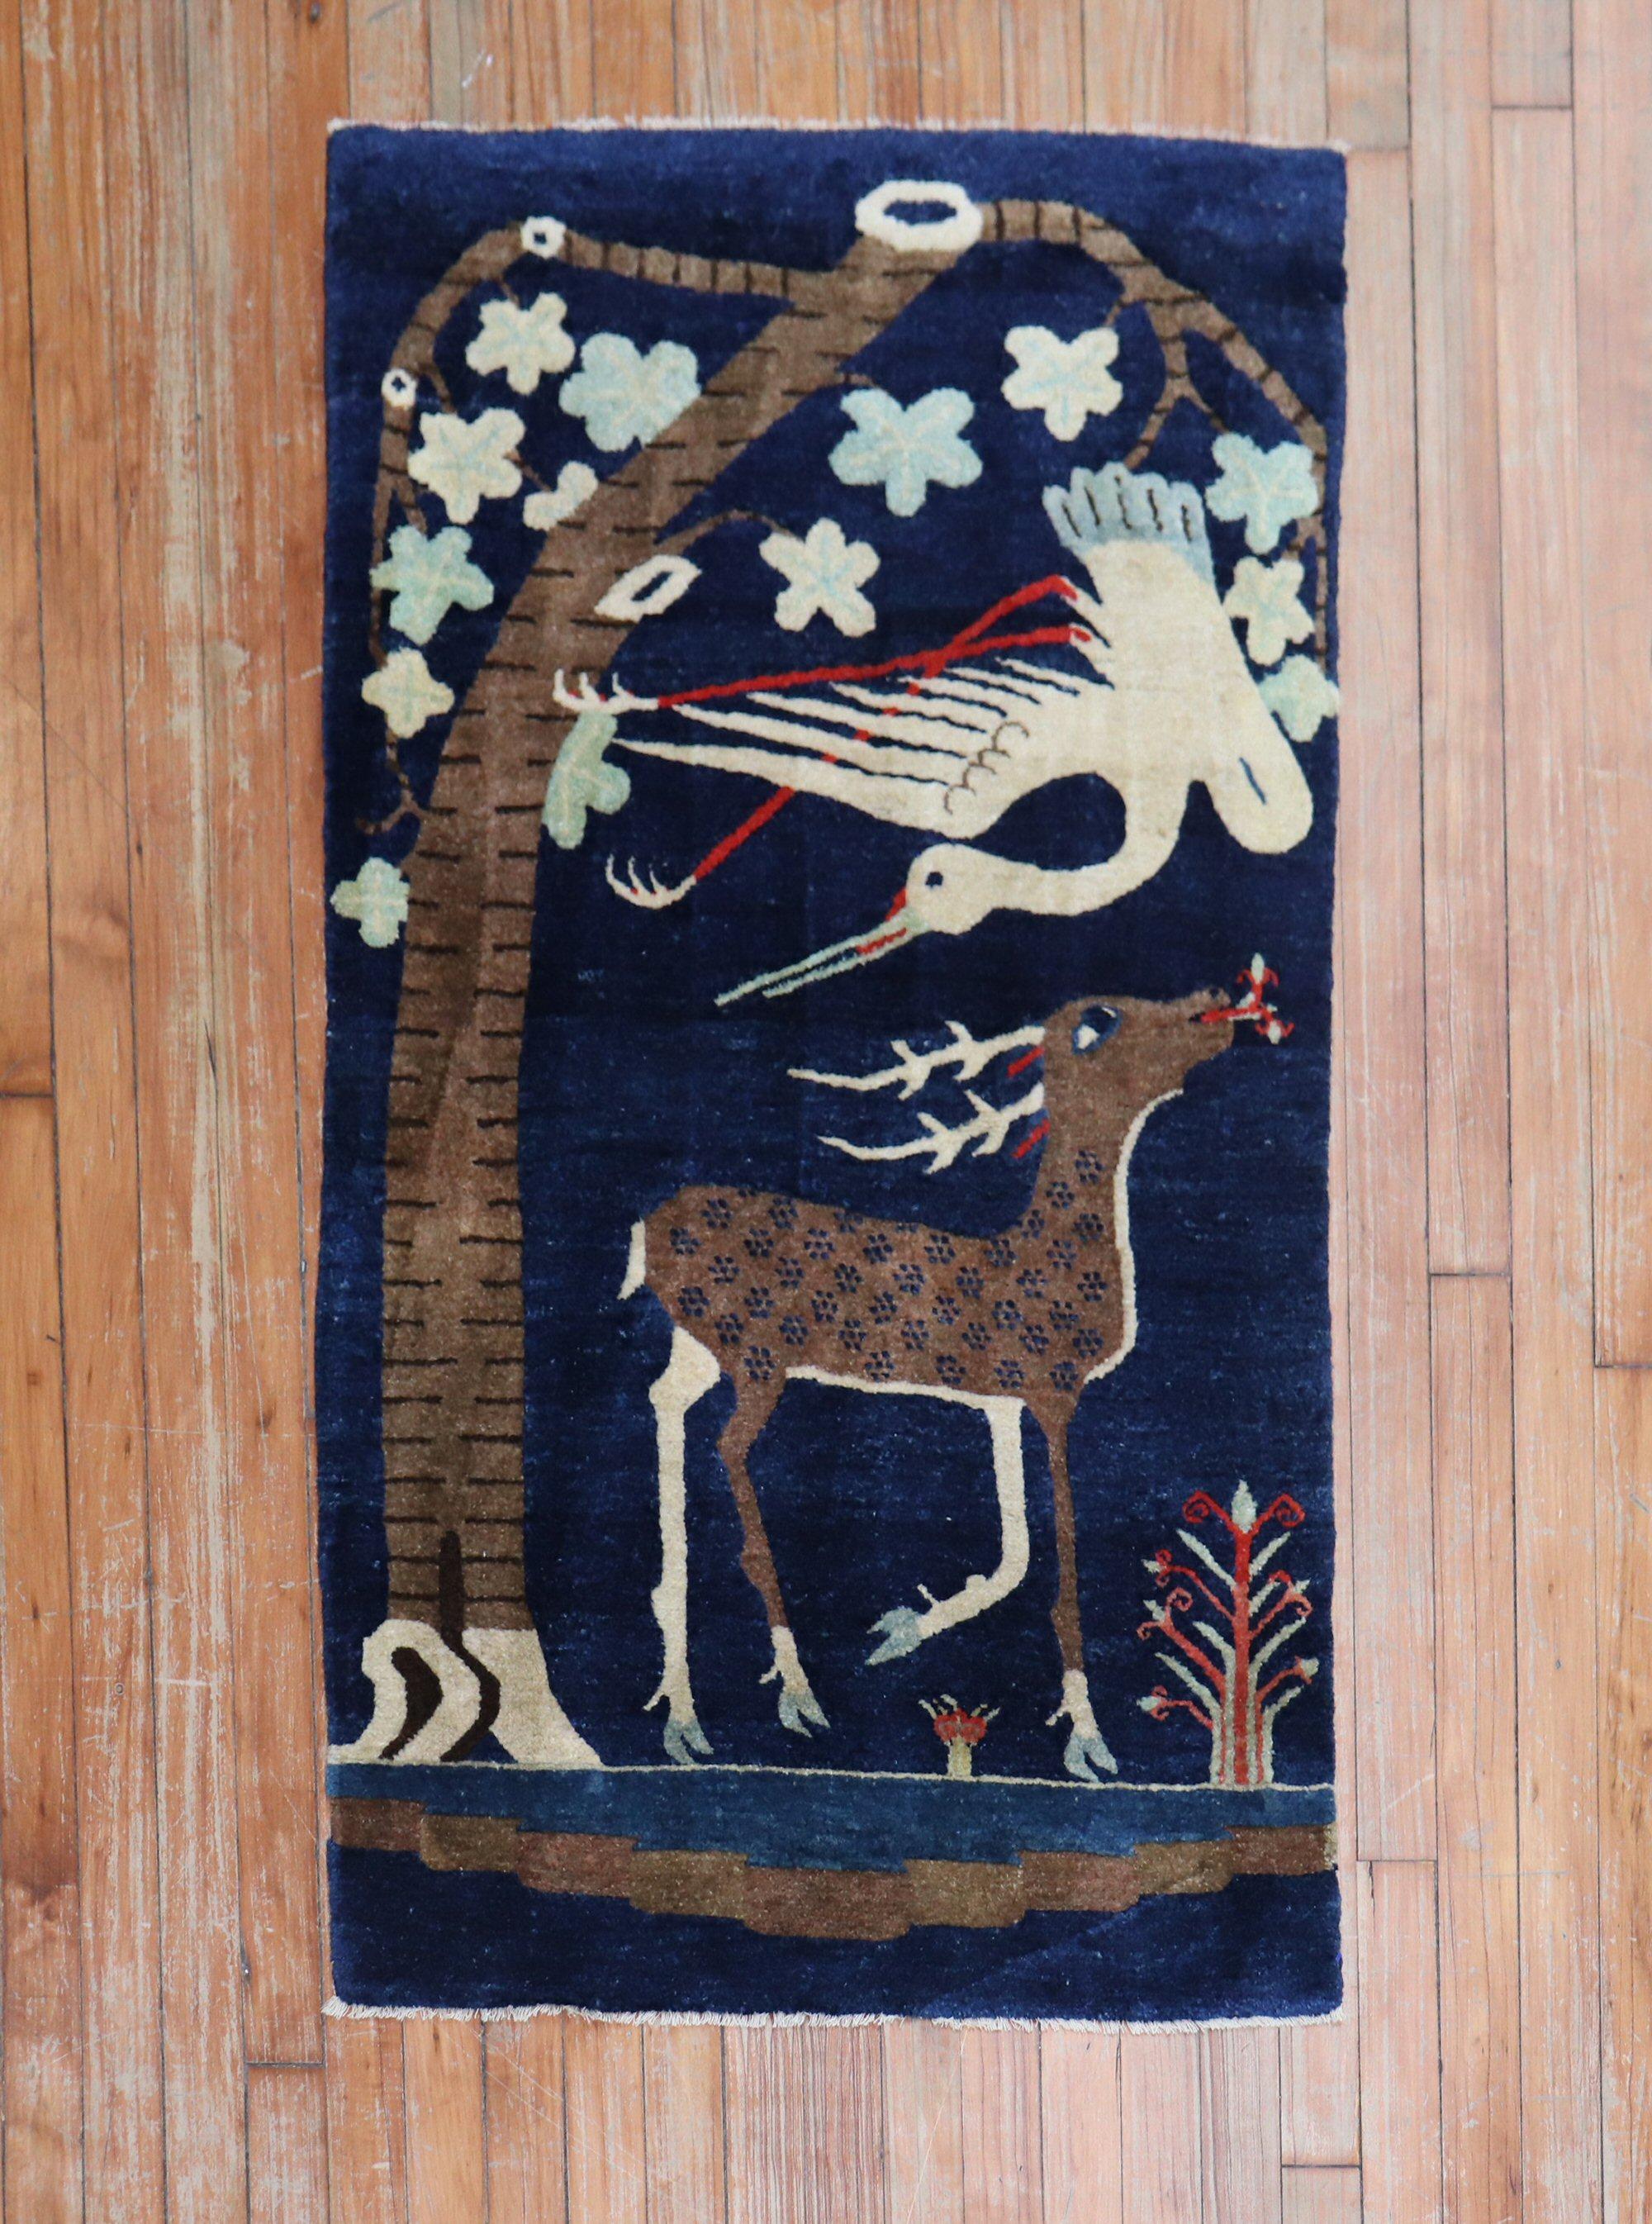 Stunning circa 1930's Chinese pictorial rug with a large deer and bird on a deep blue ground

Measures: 2'5